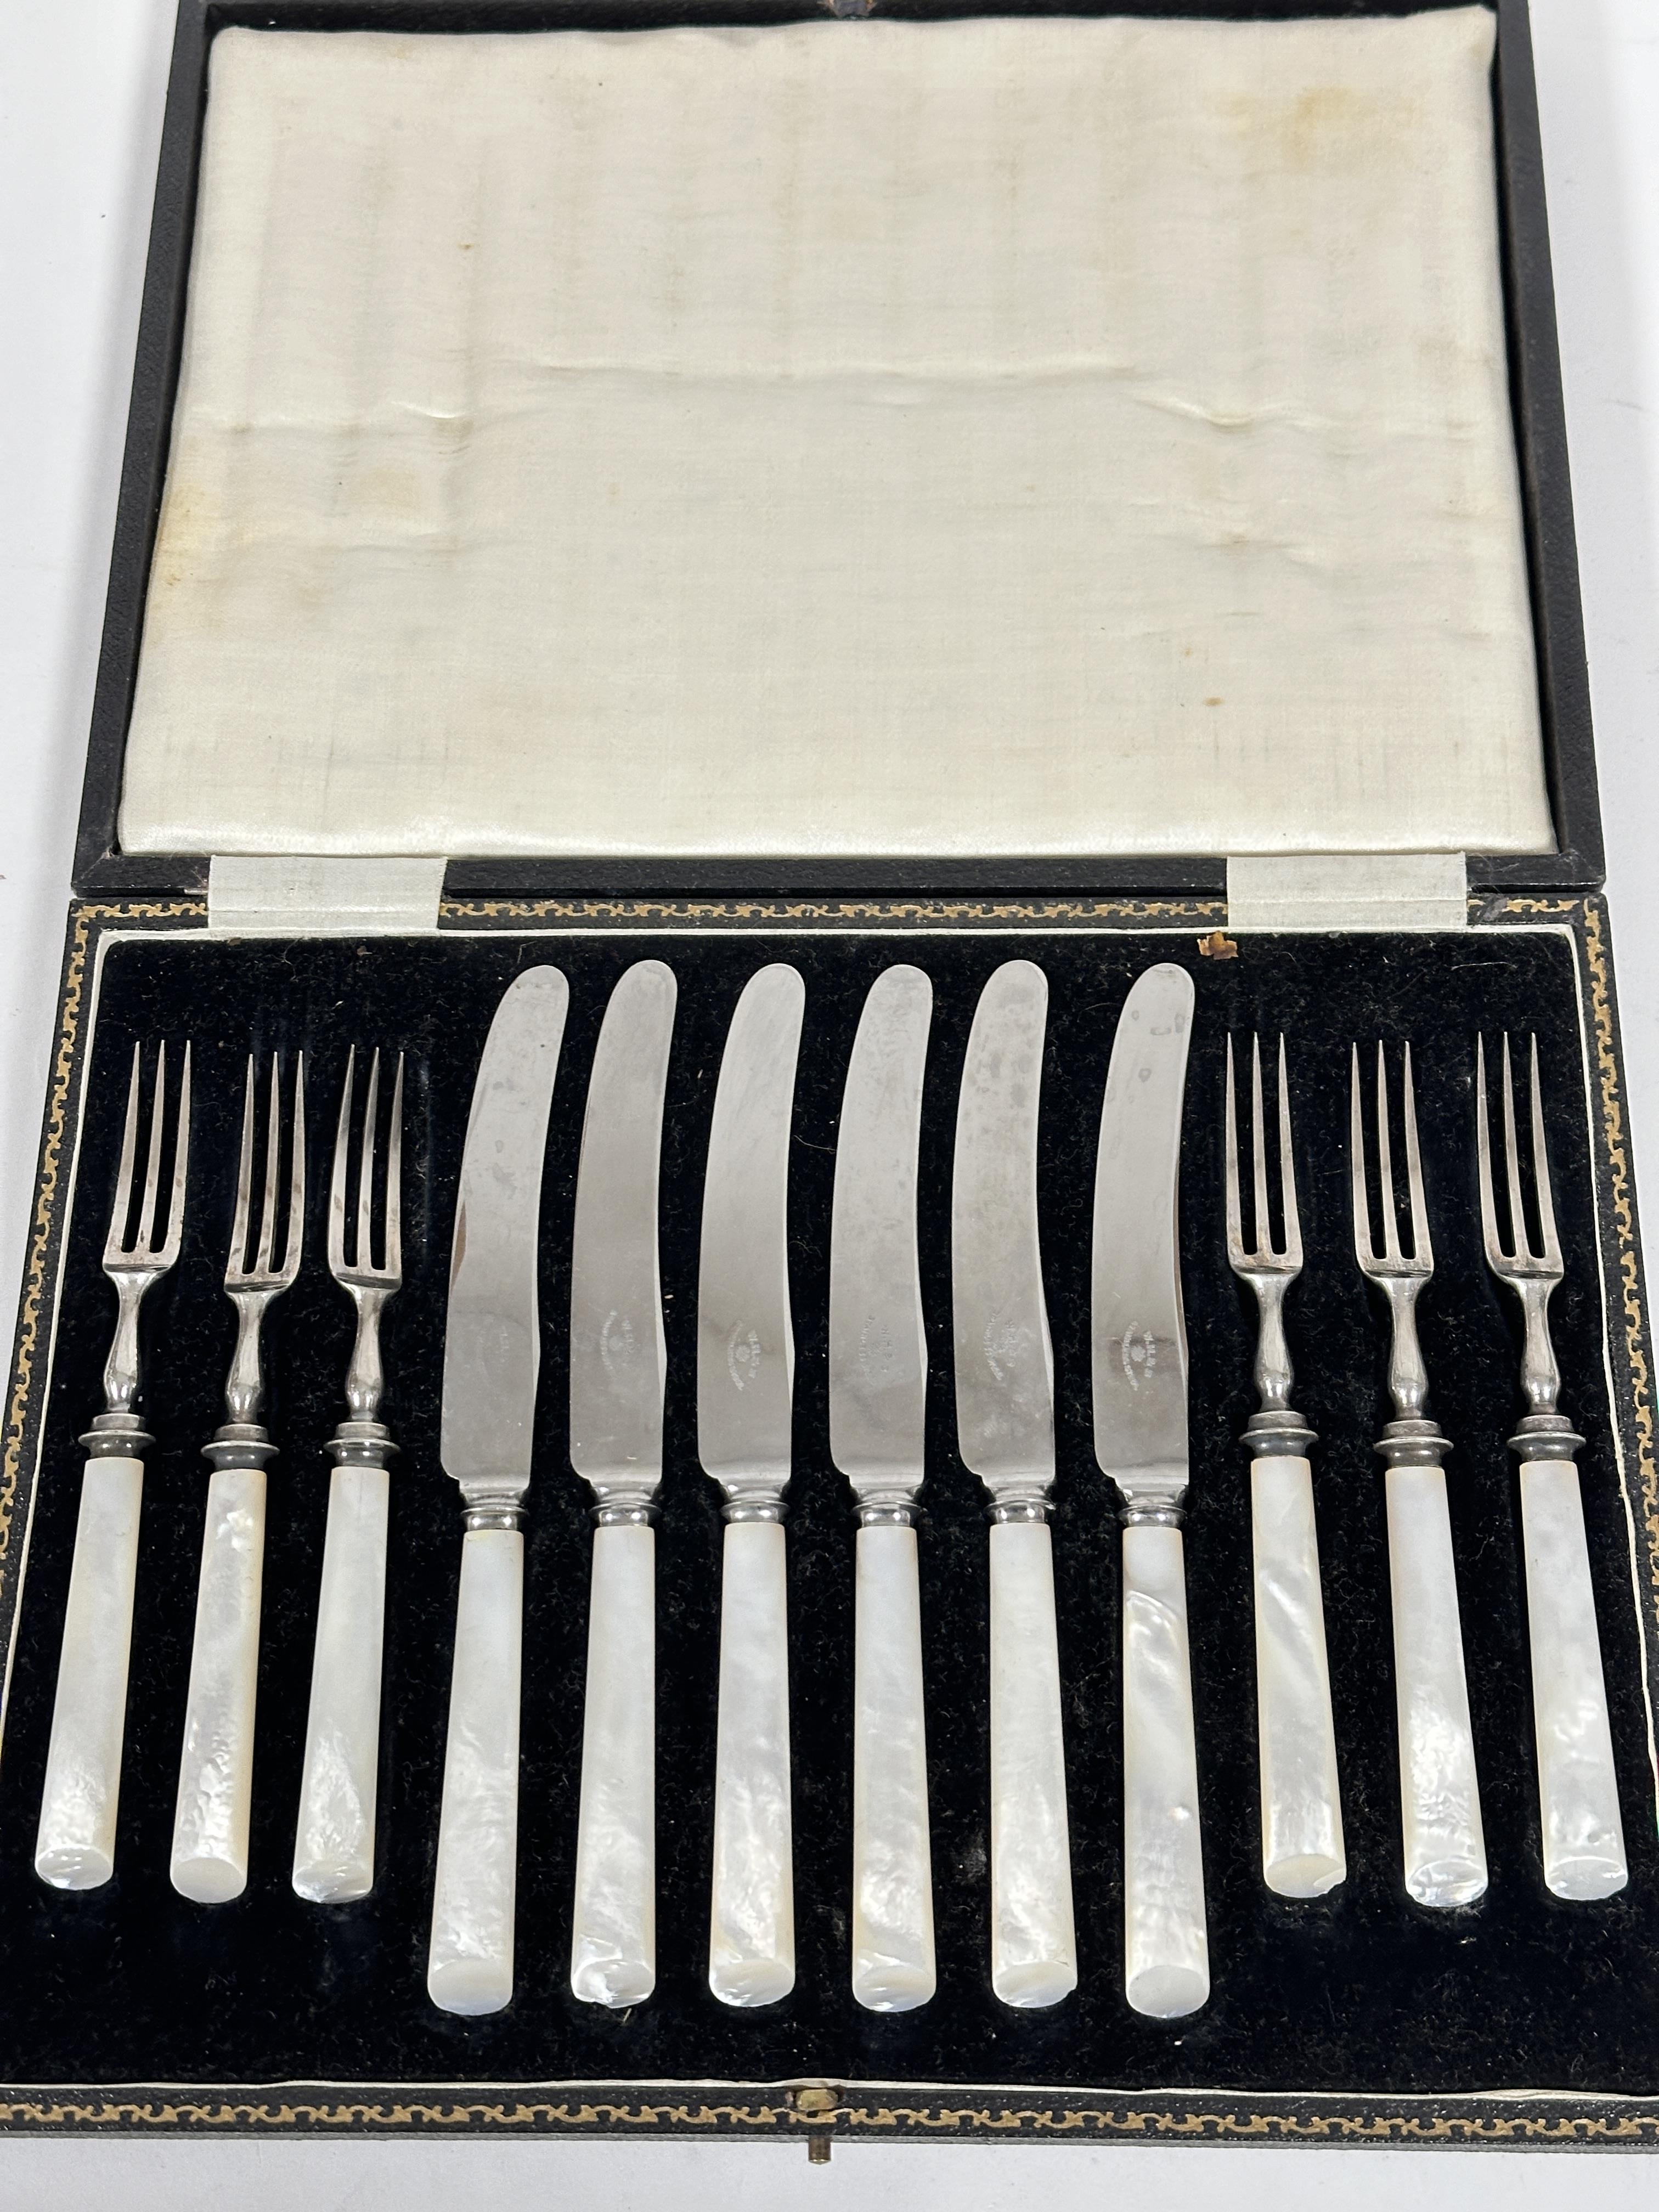 A set of six pairs of stainless steel bladed mother of pearl handled fruit knives and forks in